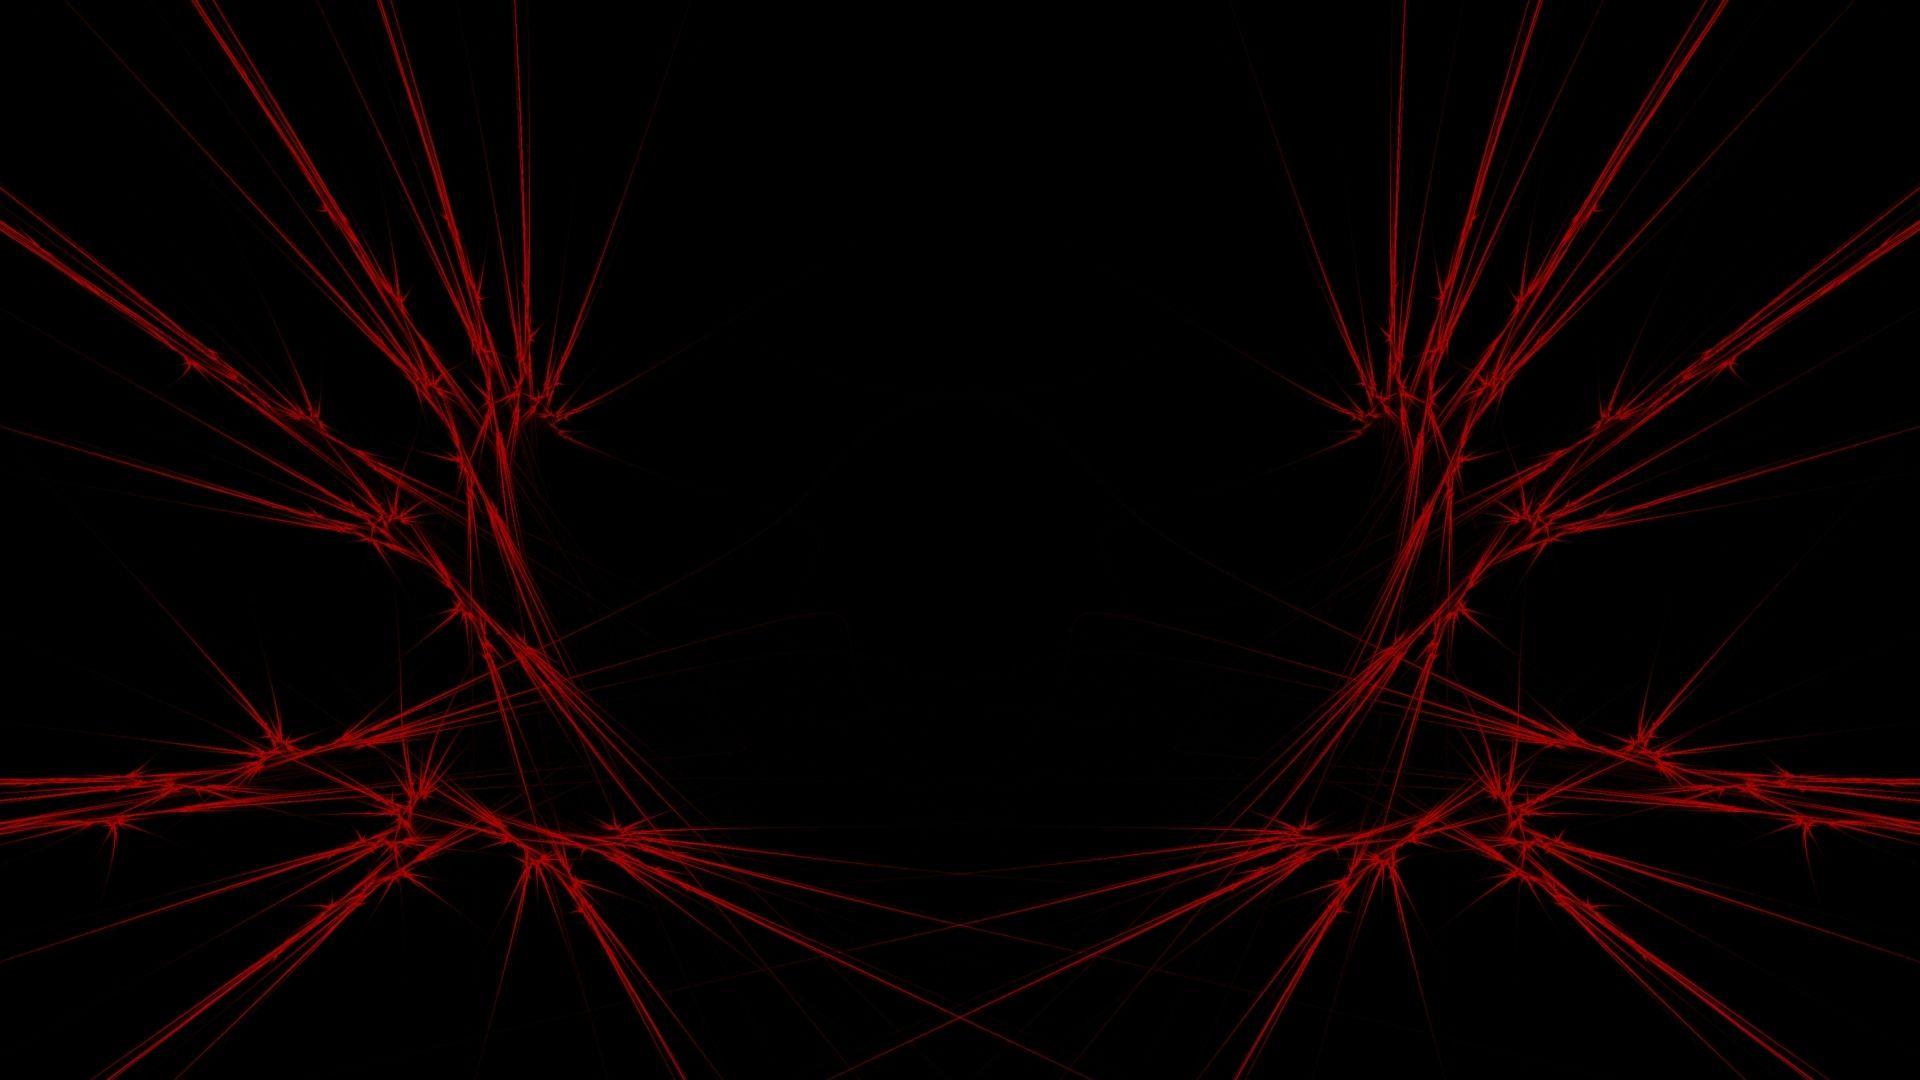 Download Wallpaper 1920x1080 red, black, abstract Full HD 1080p HD